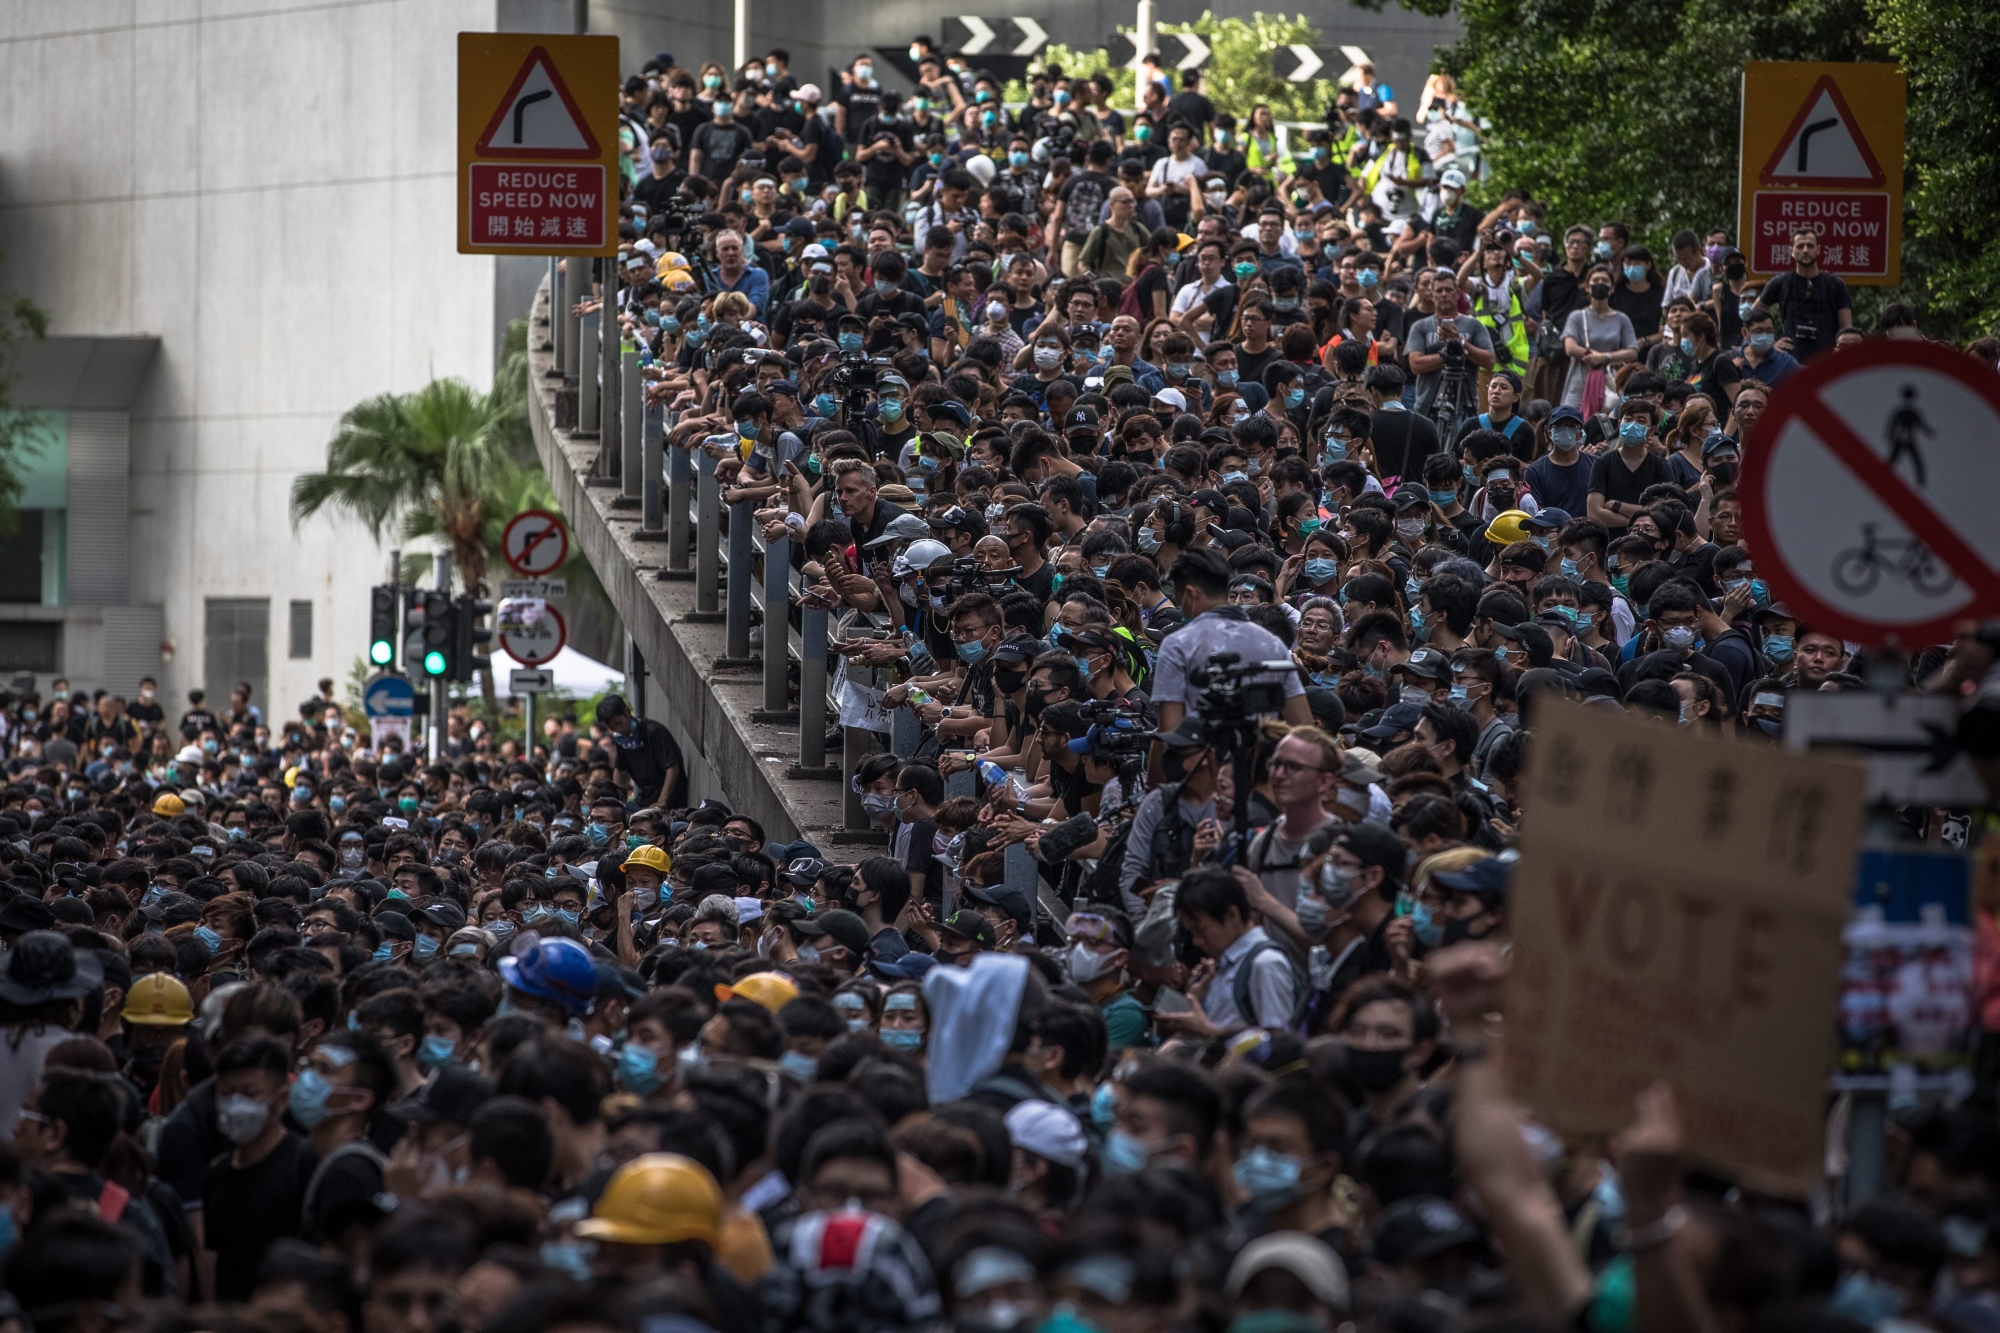 epa07663150 Protesters attend a rally outside the Wanchai Police headquarters in Hong Kong, China, 21 June 2019. Hong Kong is braced for new demonstrations as the government did not respond to a list of protester demands, such as a complete withdrawal of an extradition bill and investigation into police brutality.  EPA/ROMAN PILIPEY CHINA HONG KONG EXTRADITION BILL PROTEST